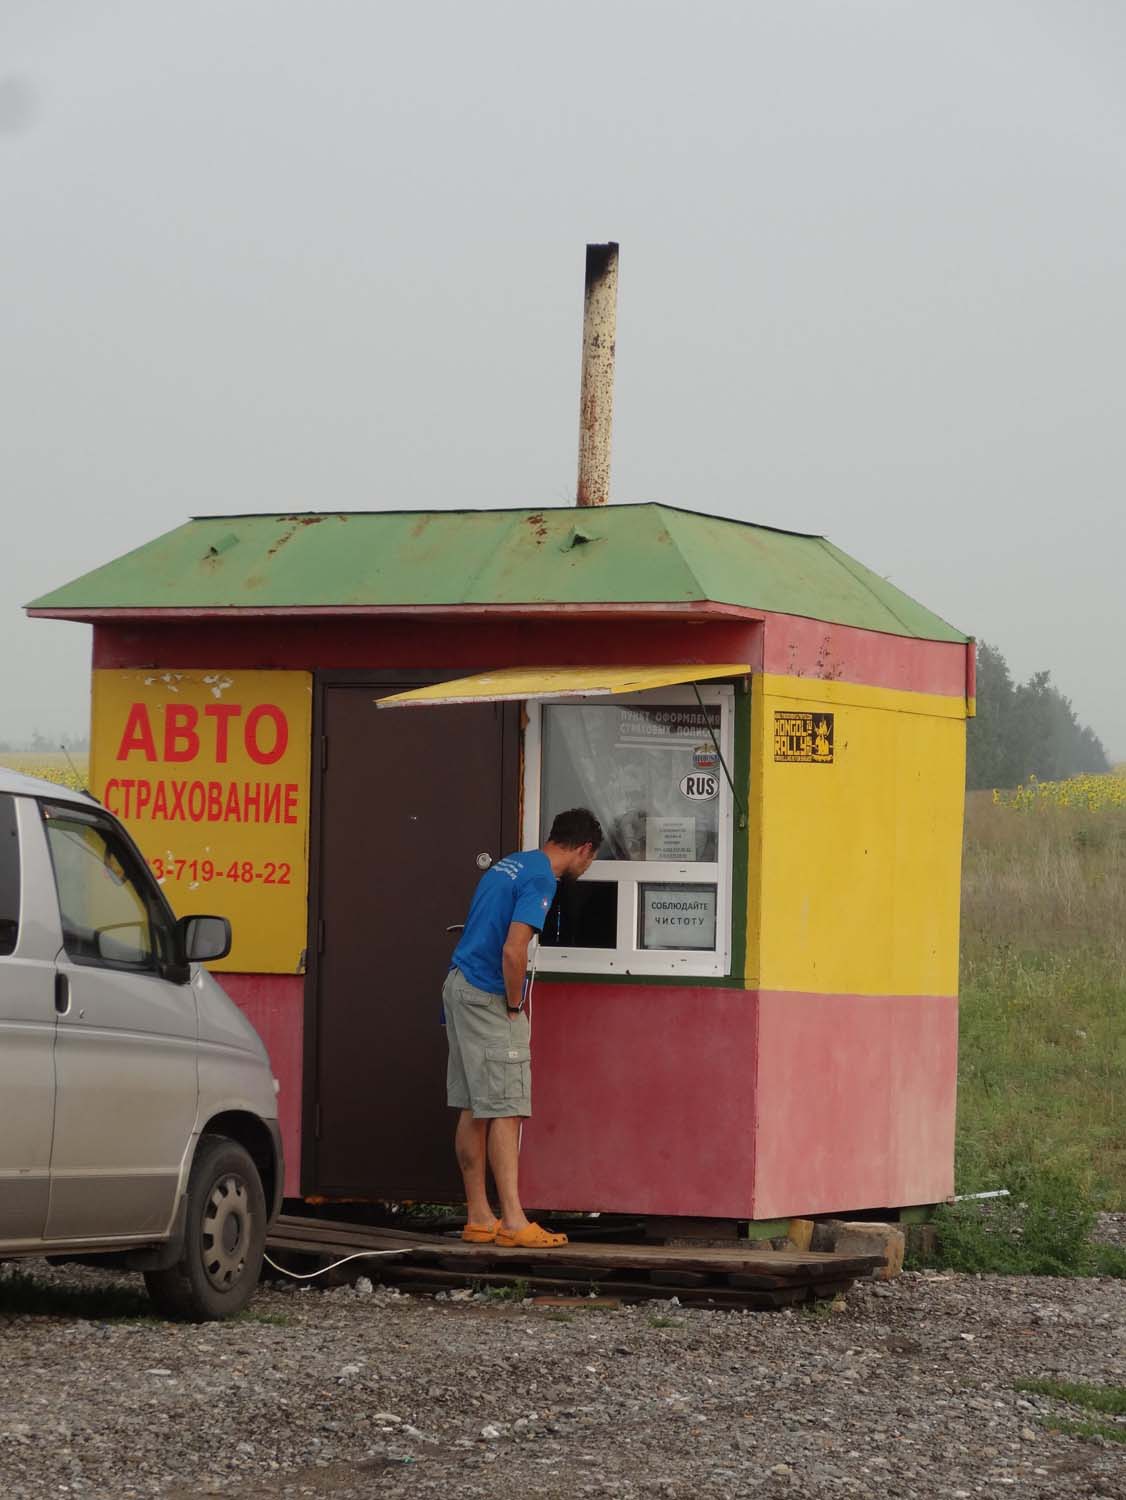 buying our Kazakhstan third party insurance (just before the border still in Russia - Kulunda)